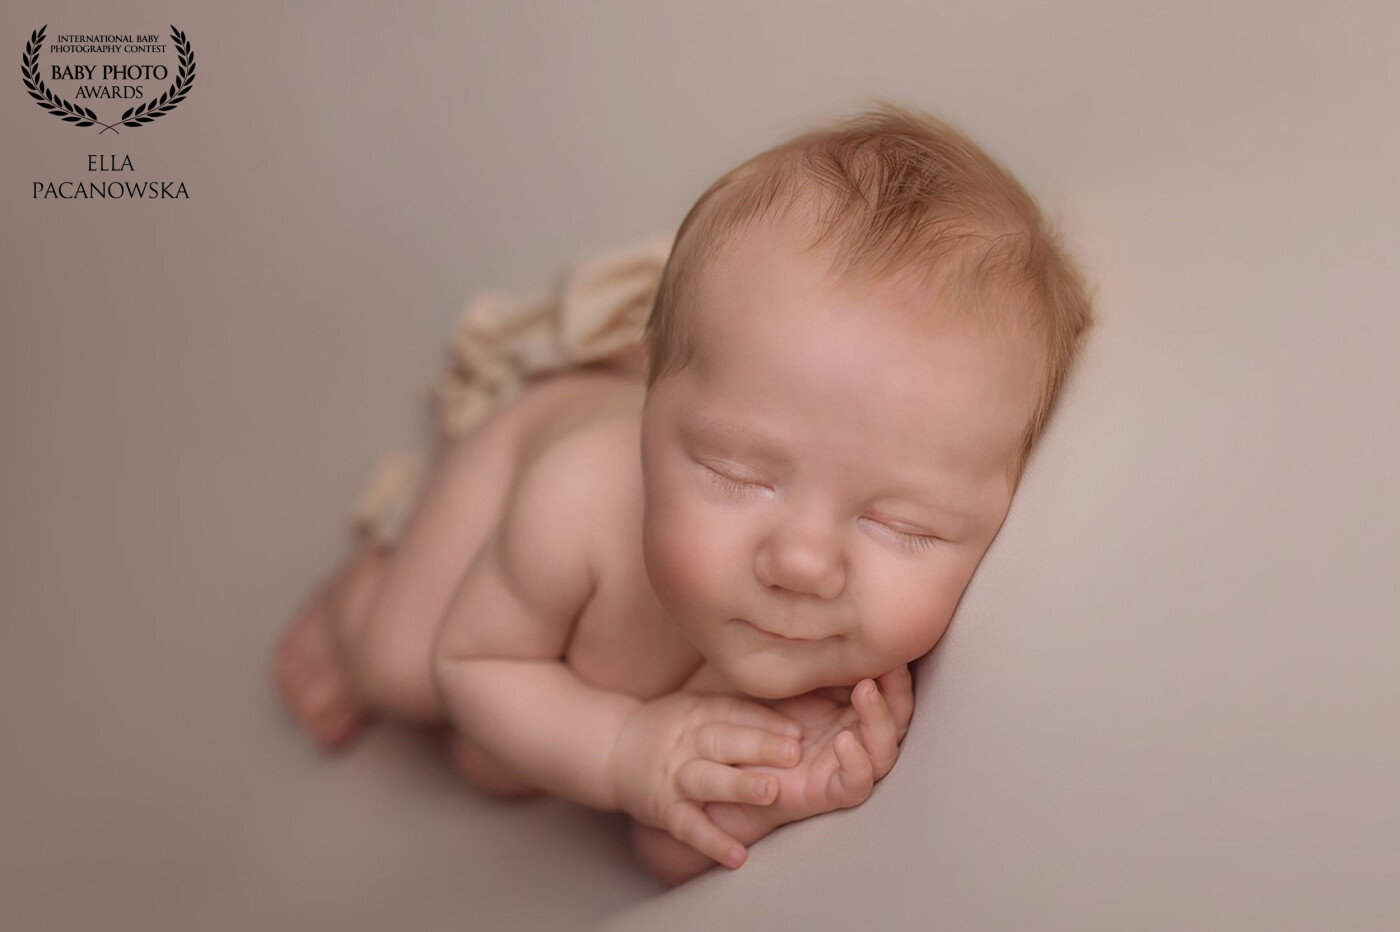 This 2 months old boy was a pure pleasure to work with. Posed like a typical newborn baby and gave me the cutest smile ever.